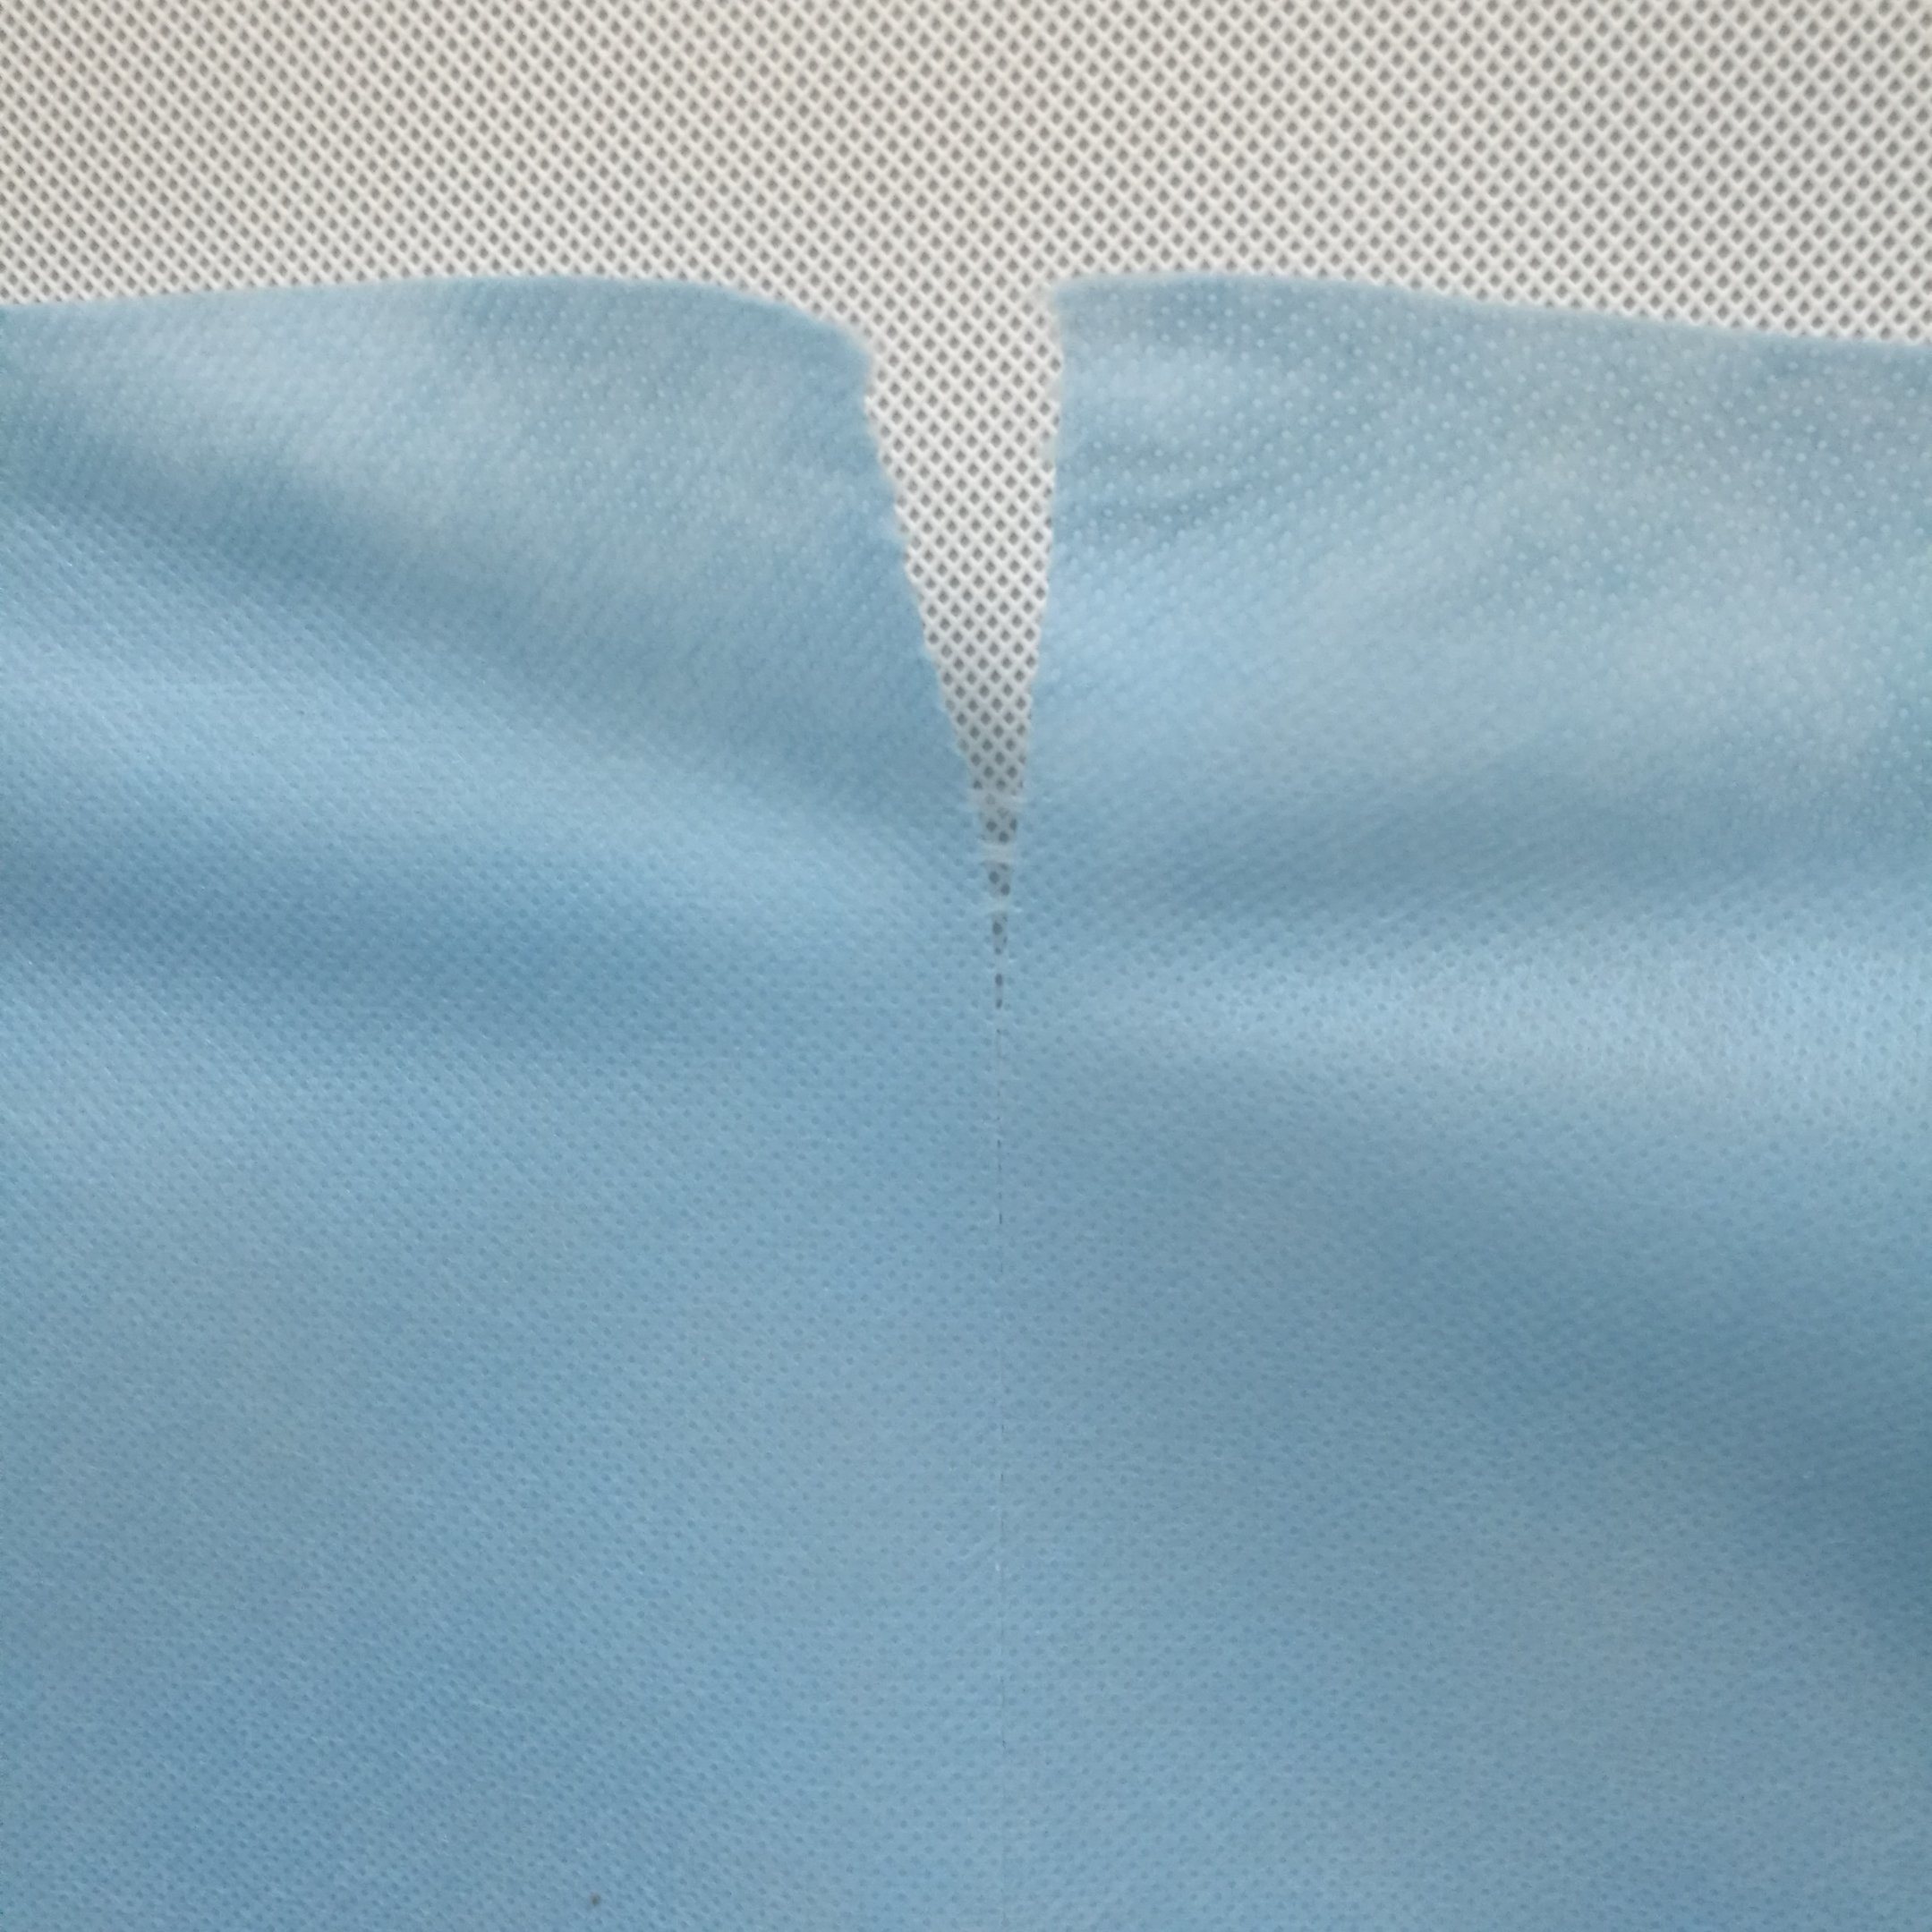 Spunbonded Nonwoven Fabric with Preforated